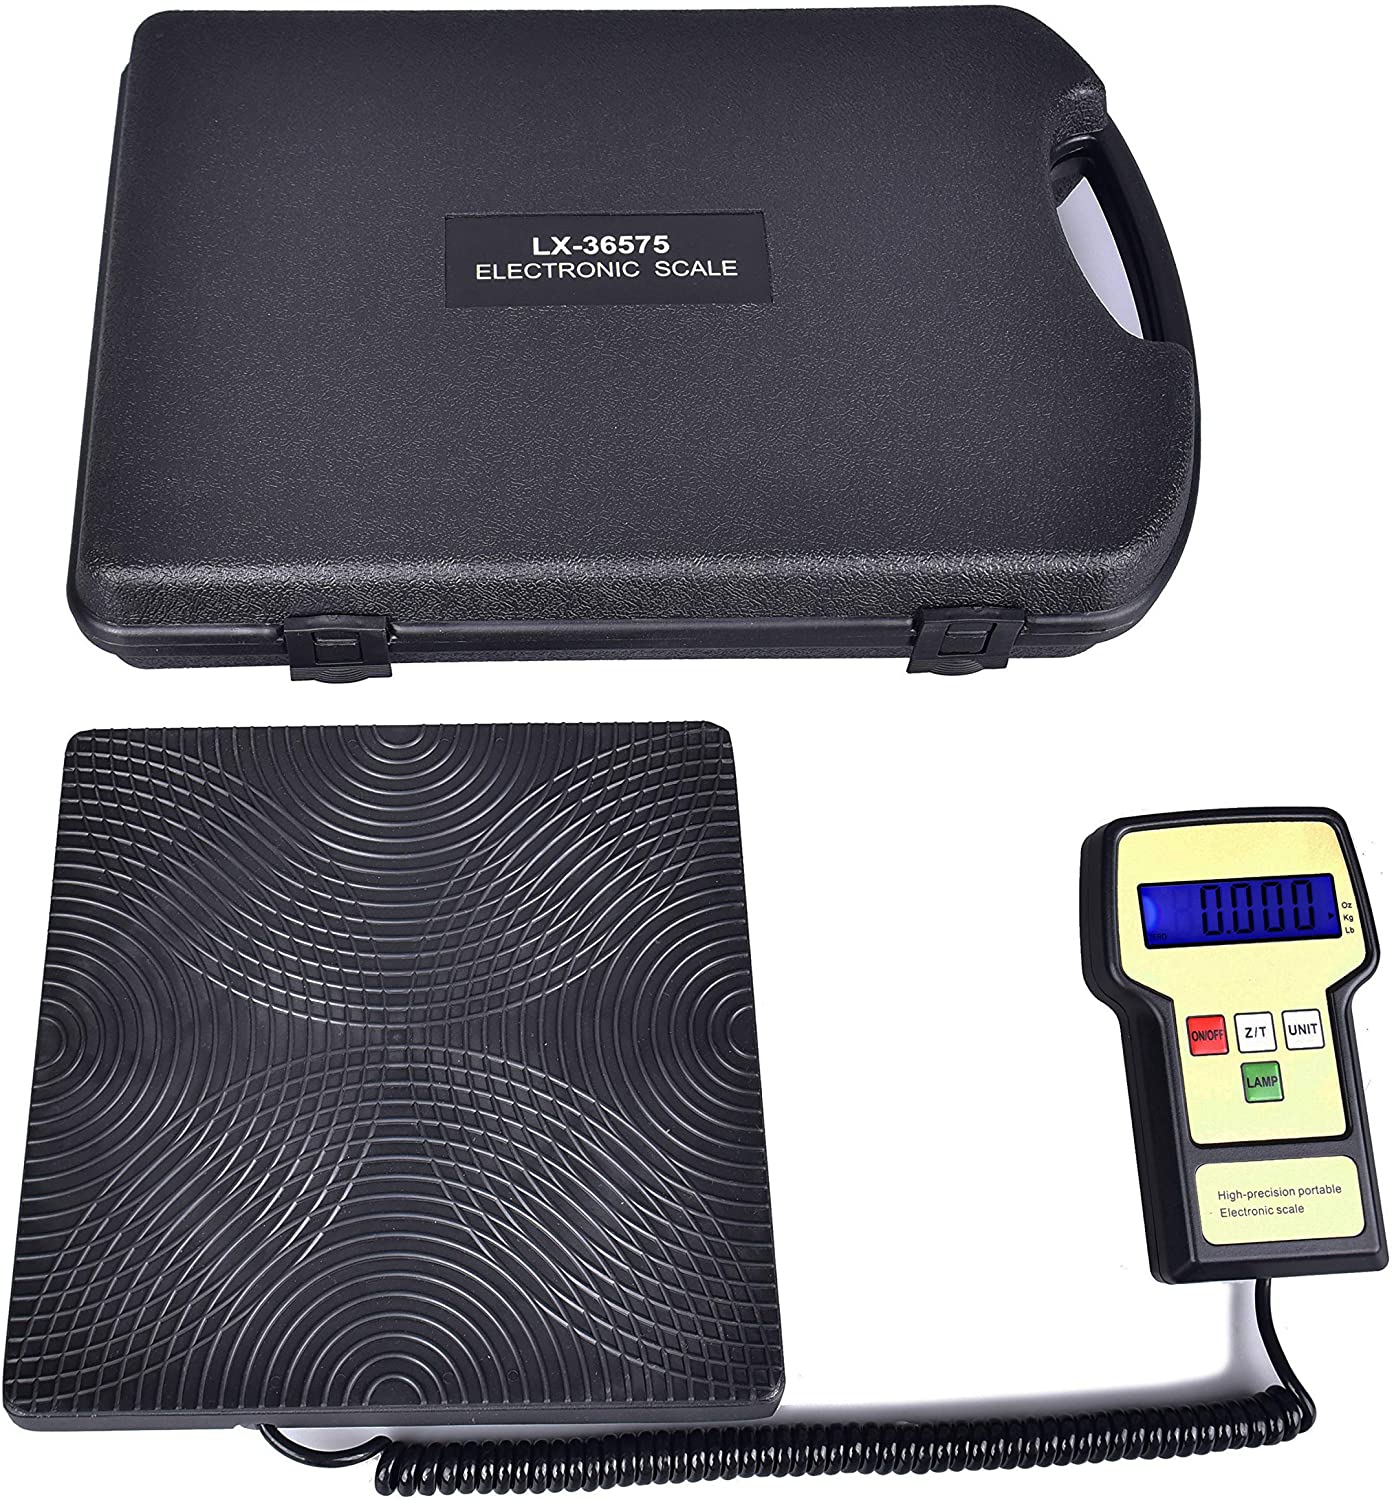 PORTABLE ELECTRONIC SCALE